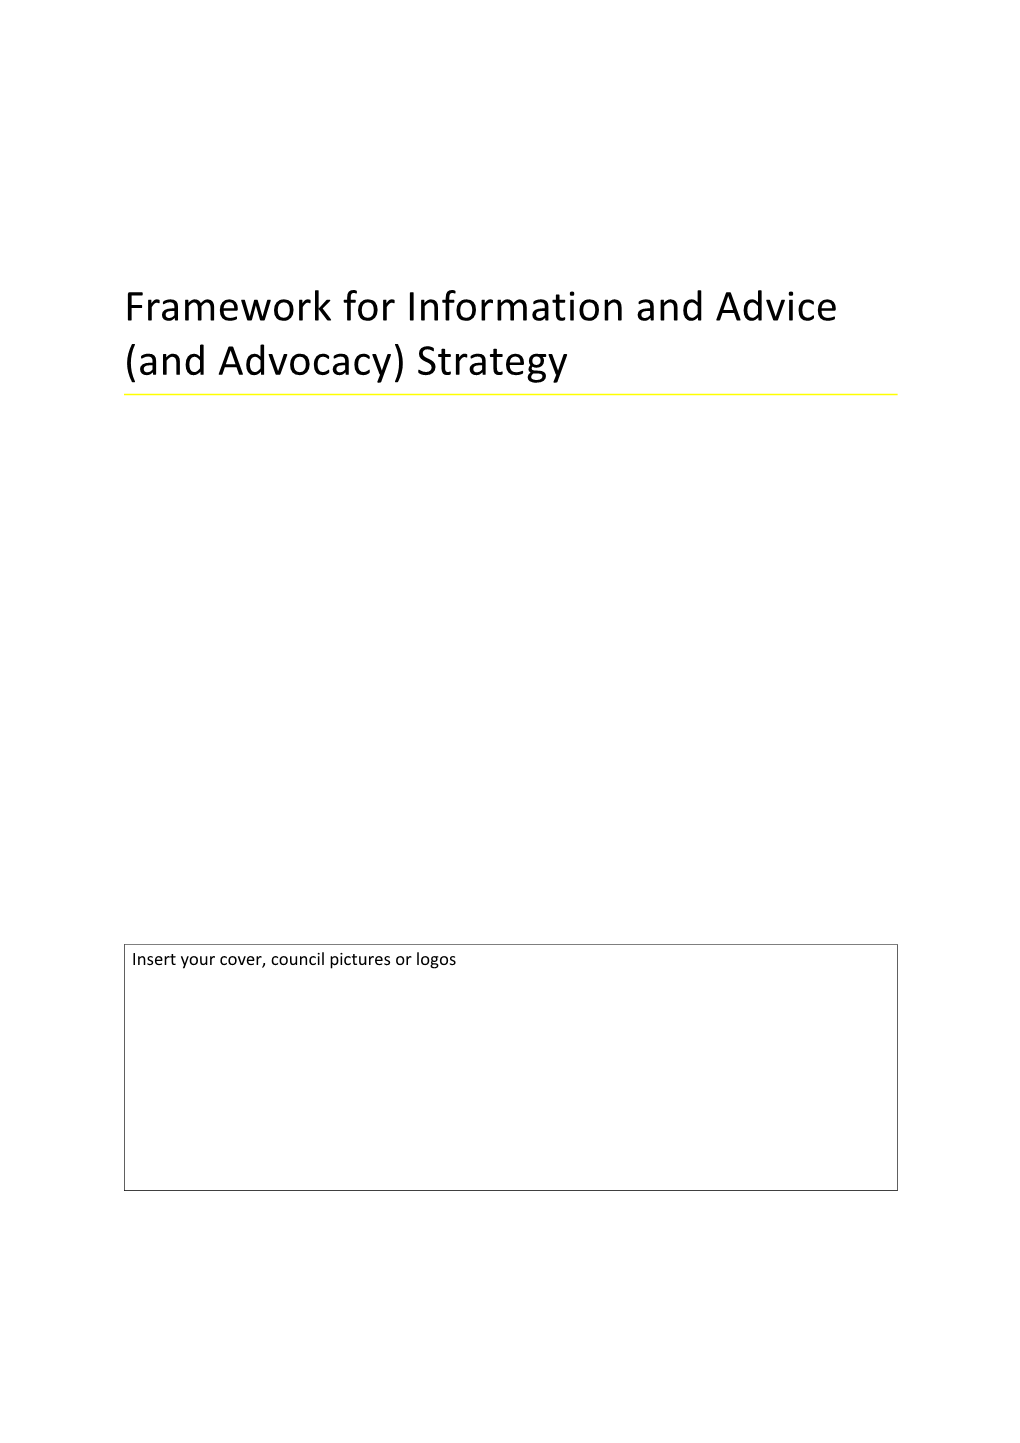 Framework for Information and Advice (And Advocacy) Strategy